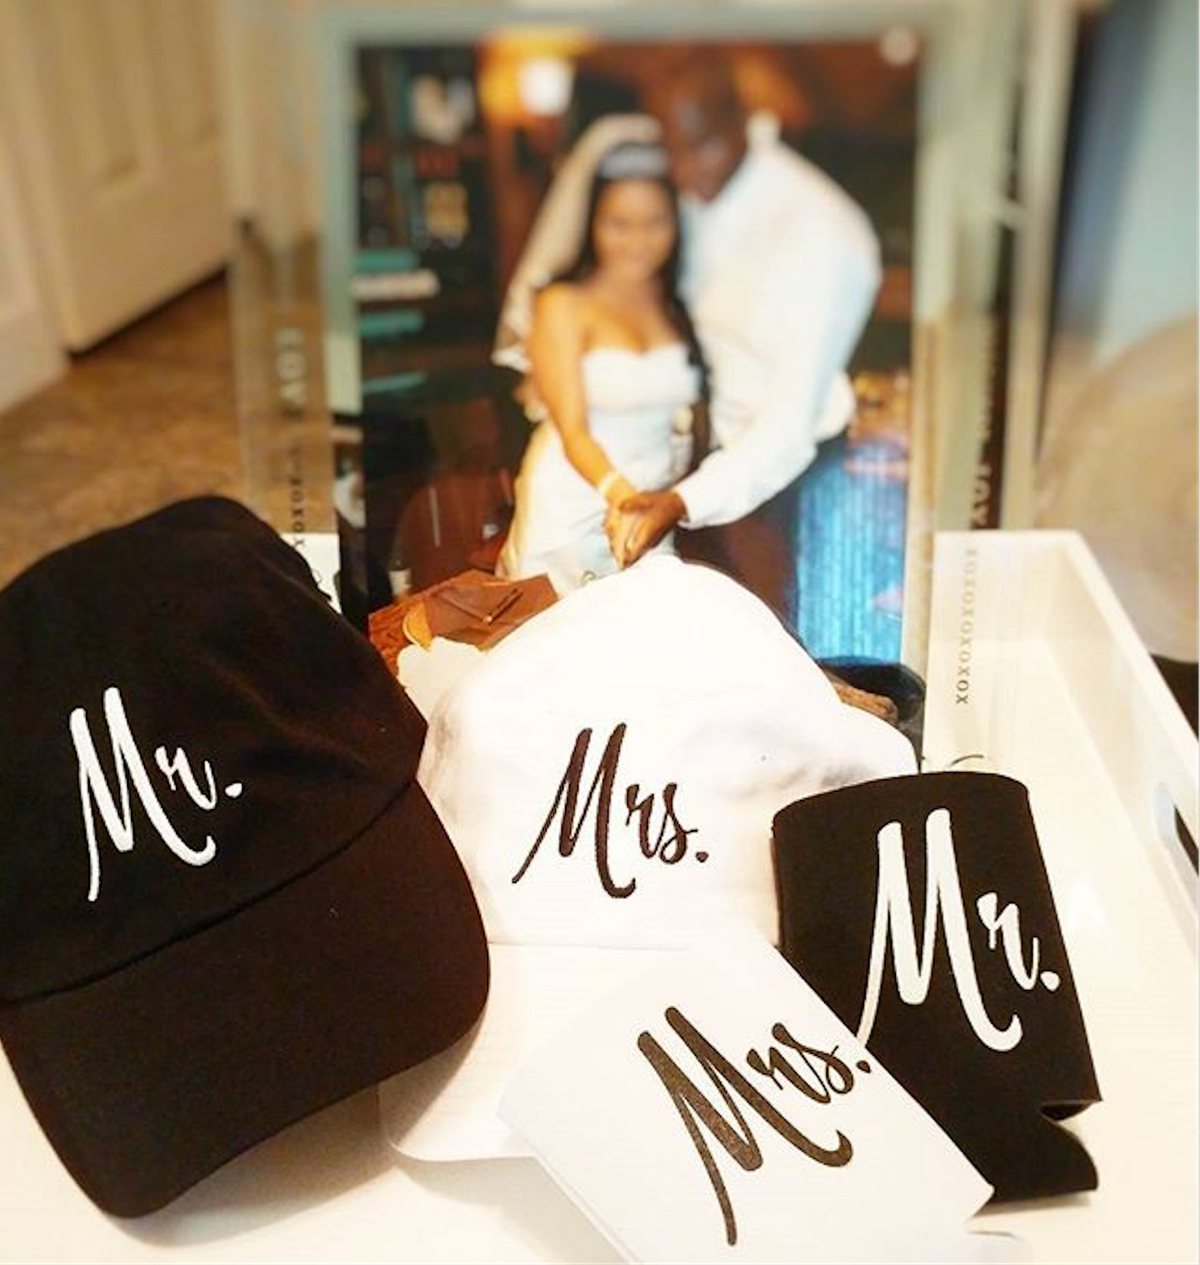 Mr. & Mrs. | Matching Newlywed Wedding Baseball Caps and Beer Holder (Coolie)